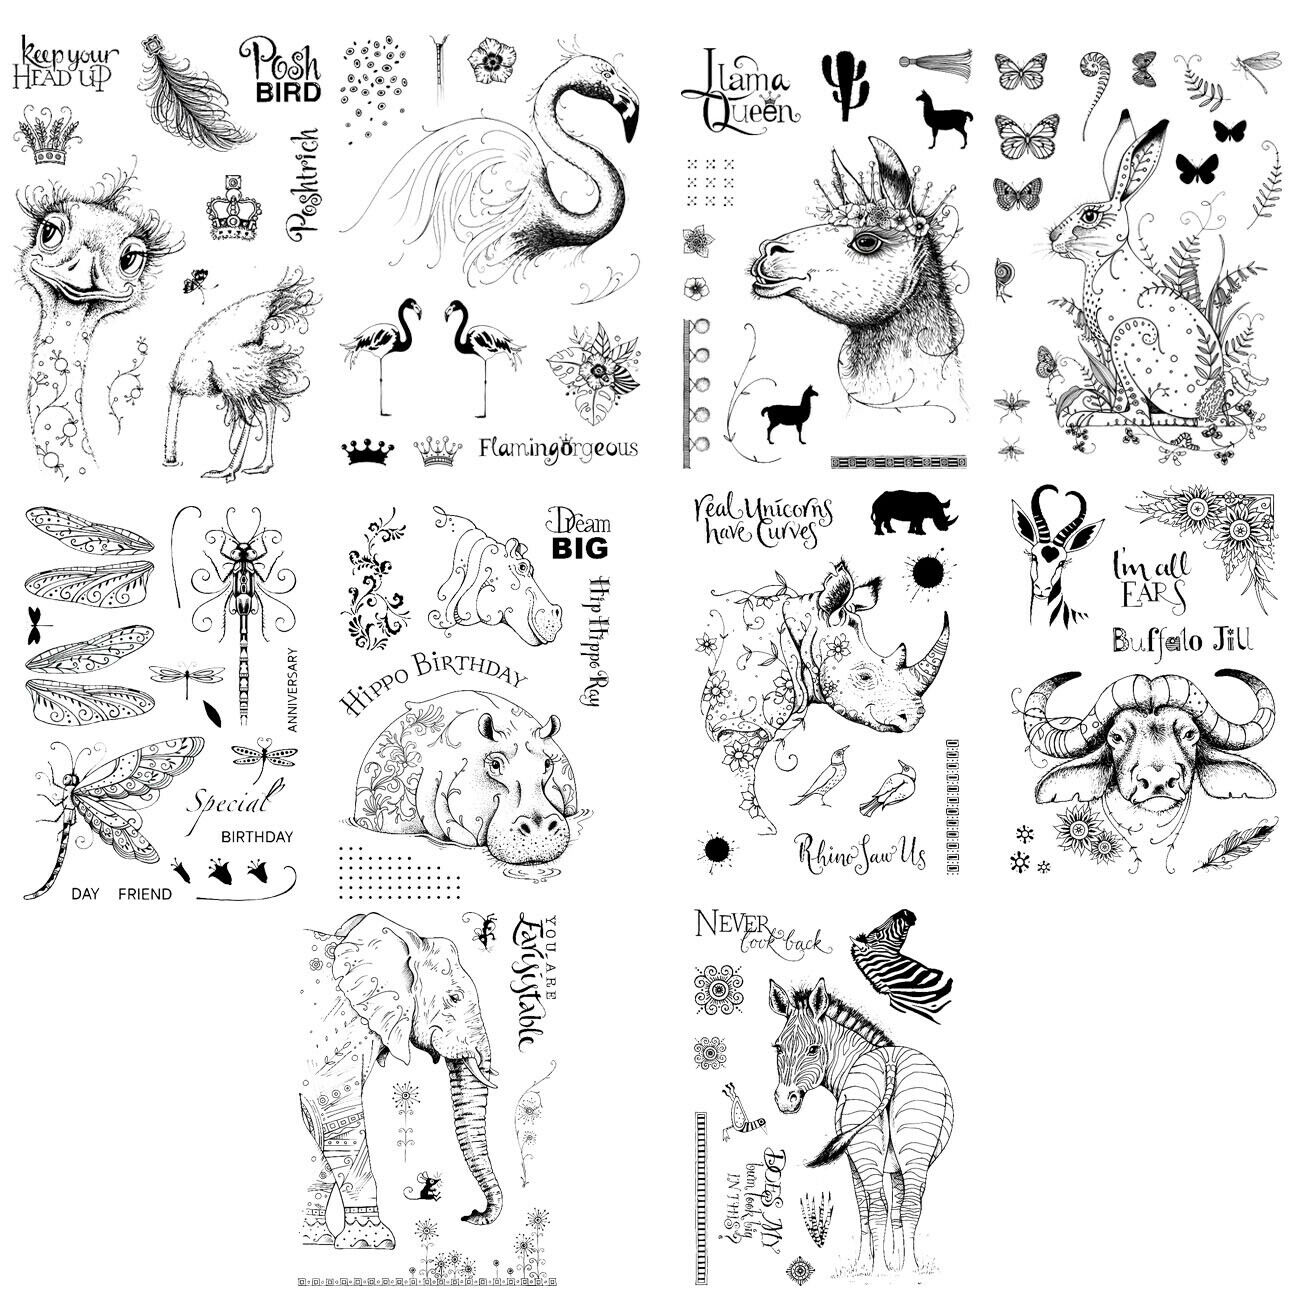 6x8 Wilde Organism Stempel Clear Stamps Silikonstempel Siliconstempel Einladung